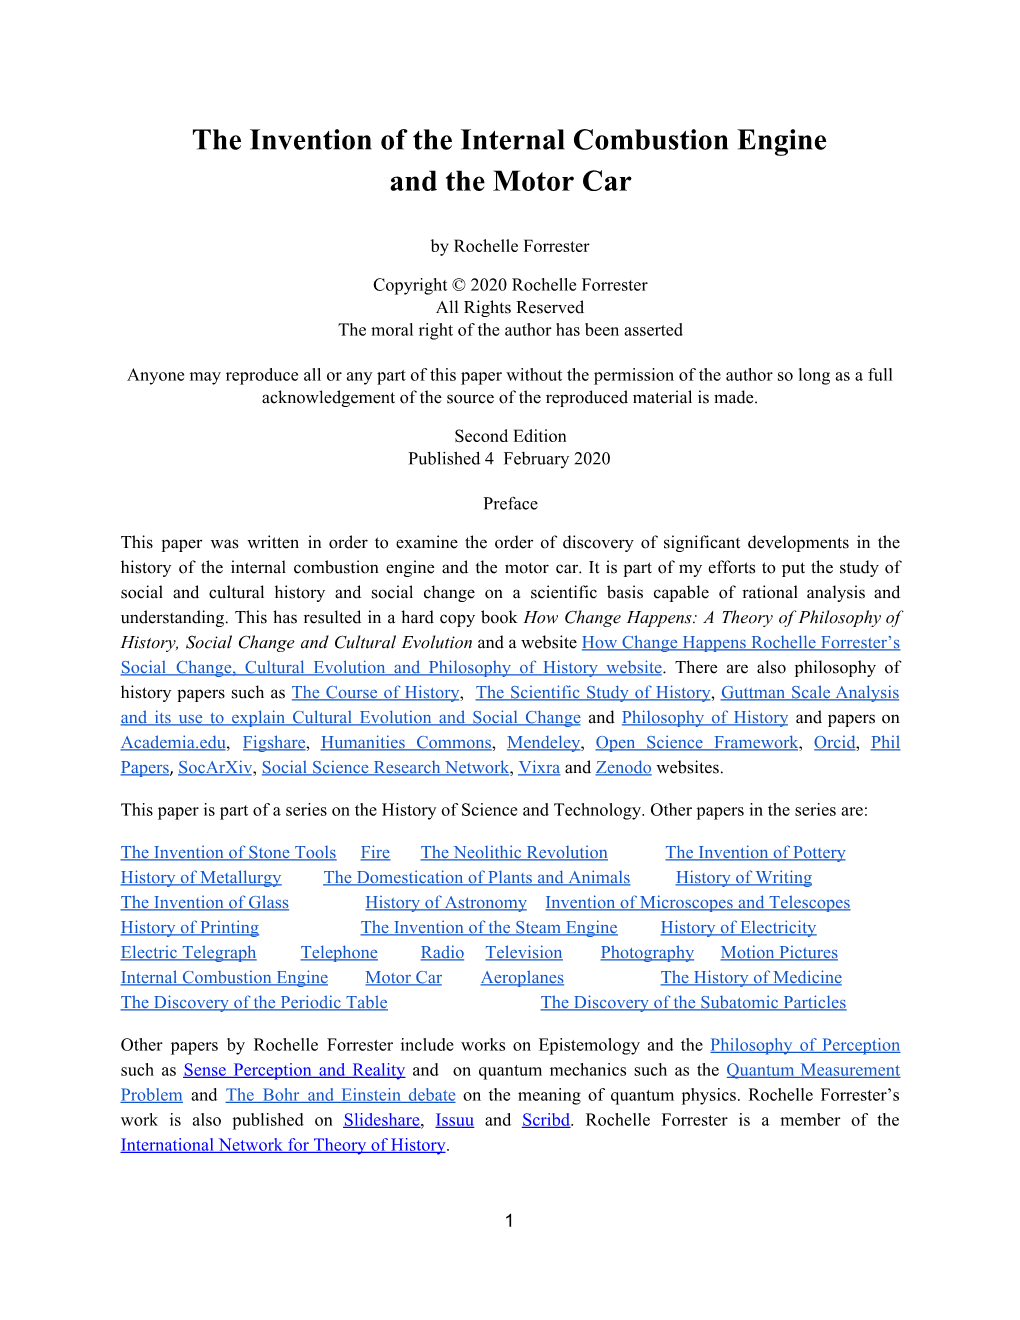 The Invention of the Internal Combustion Engine and the Motor Car